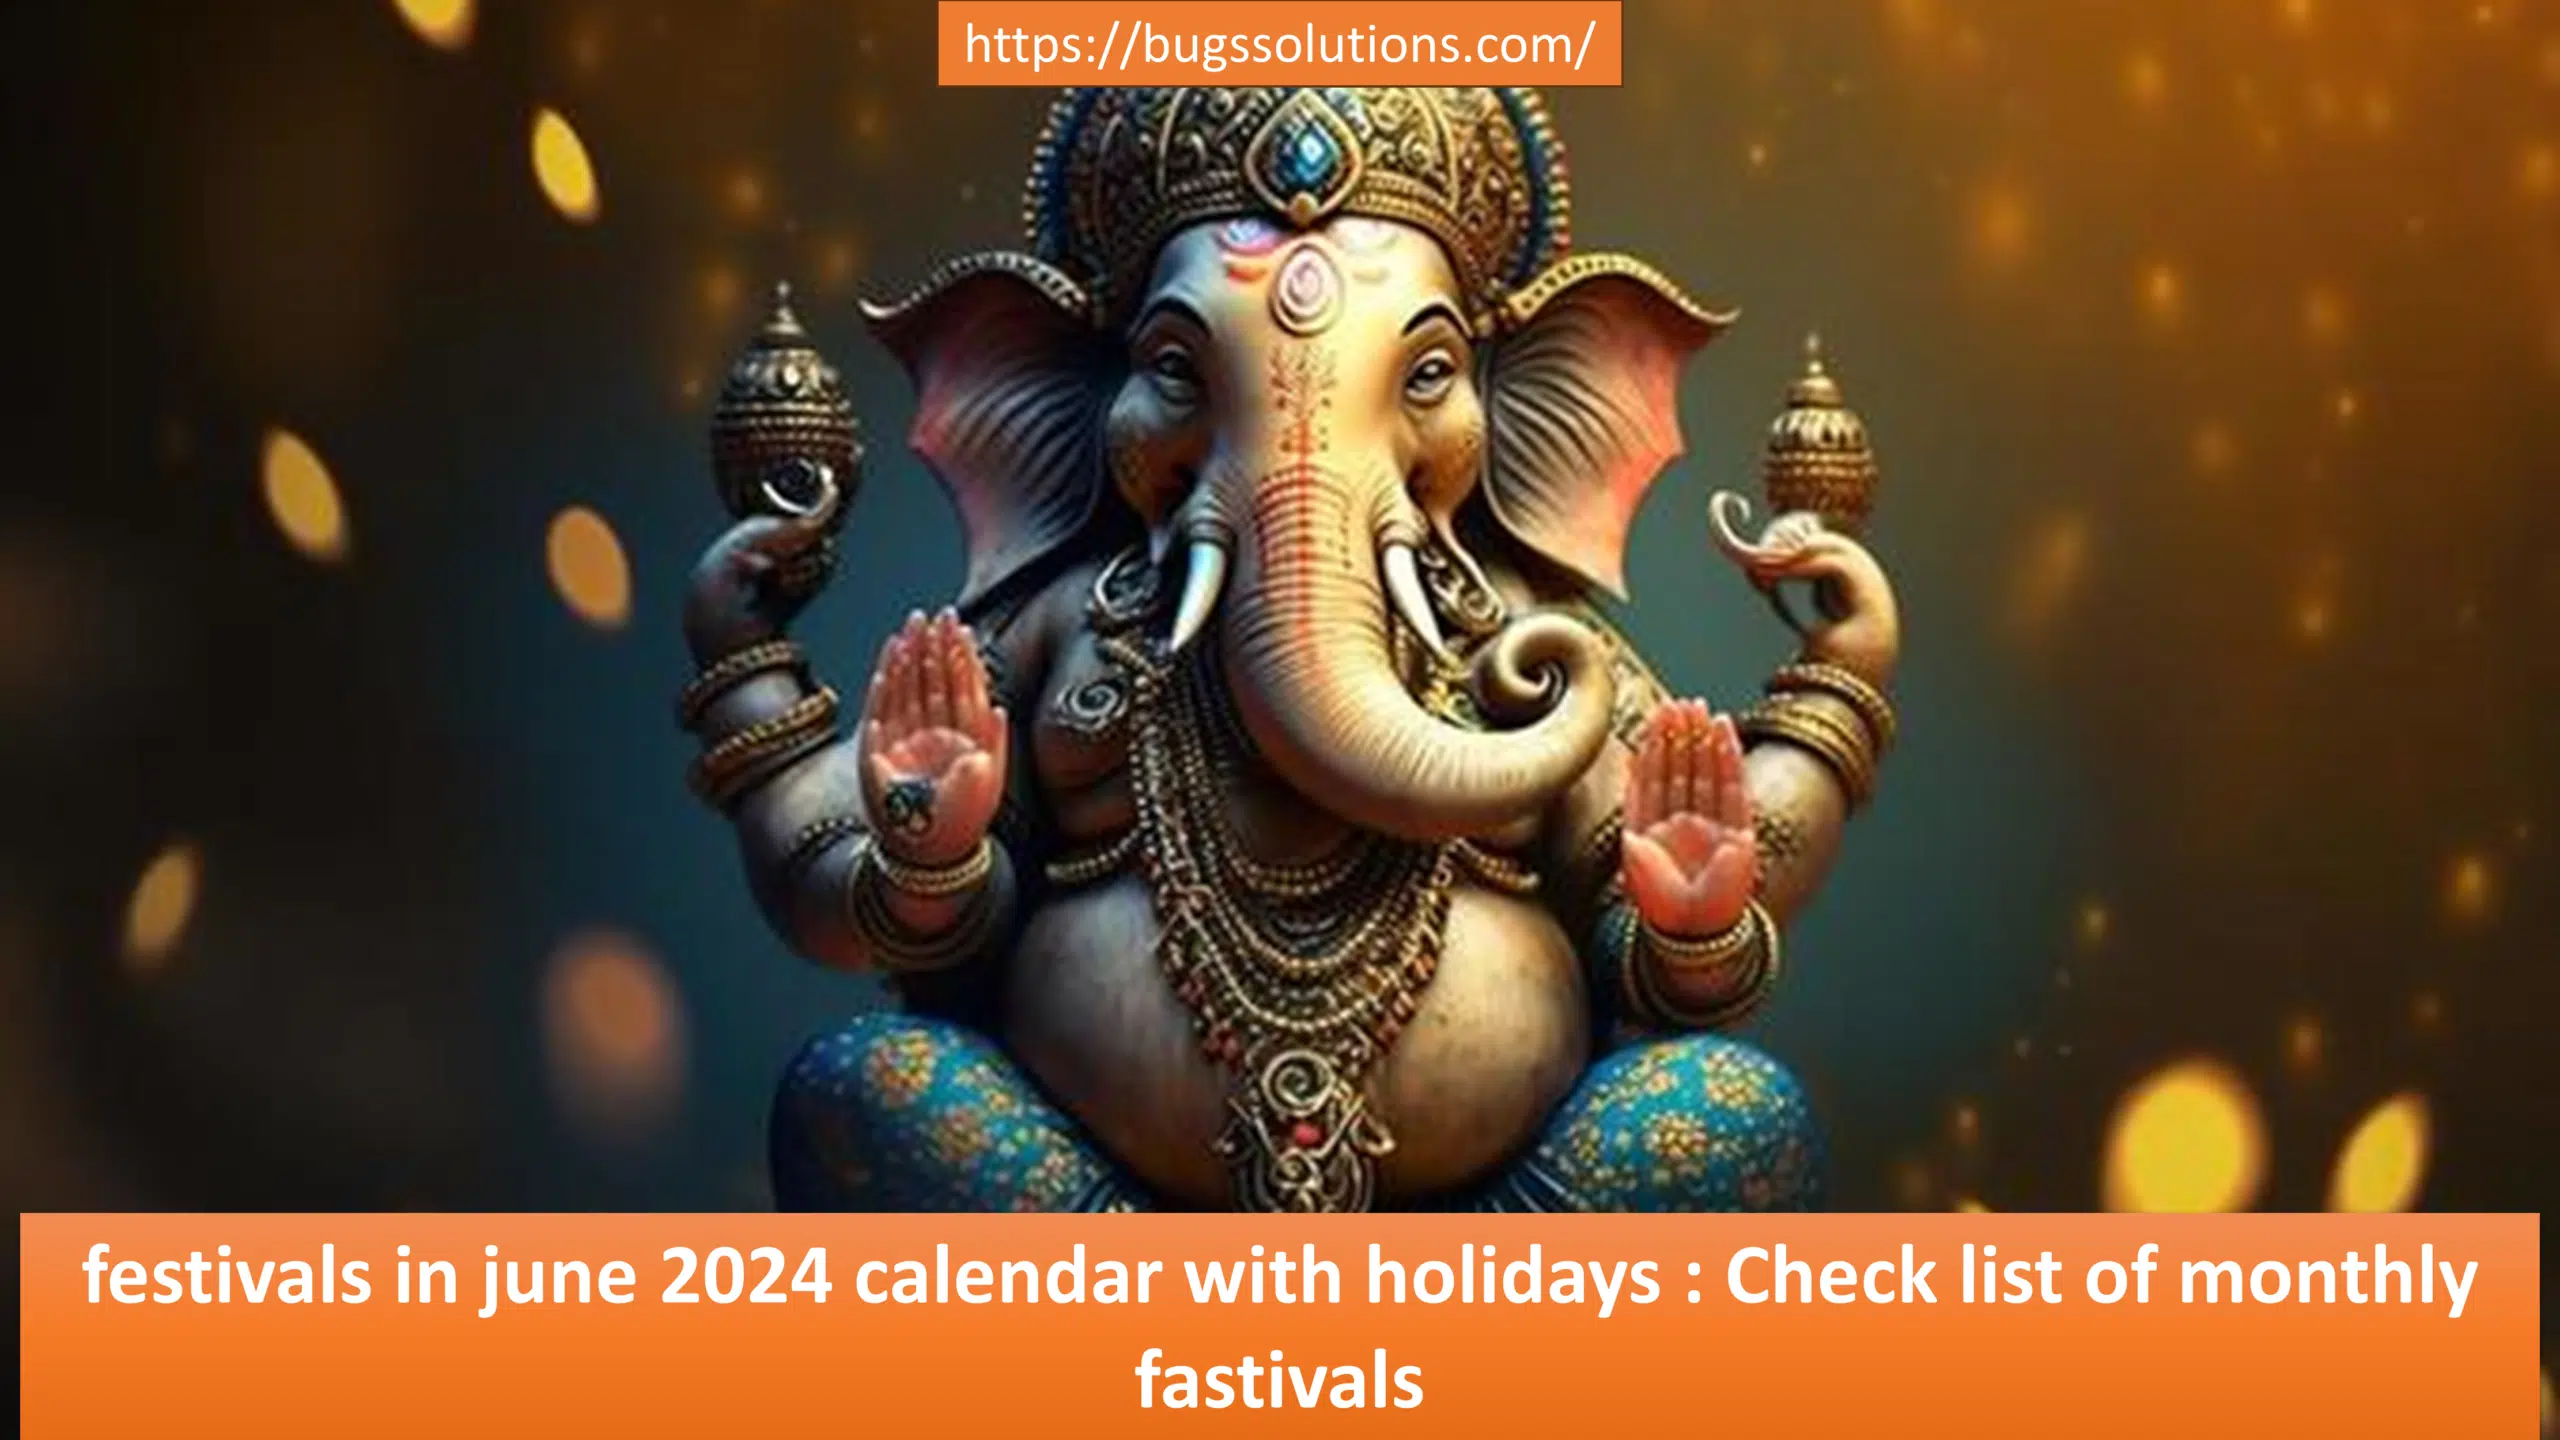 festivals in june 2024 calendar with holidays Check list of monthly fastivals